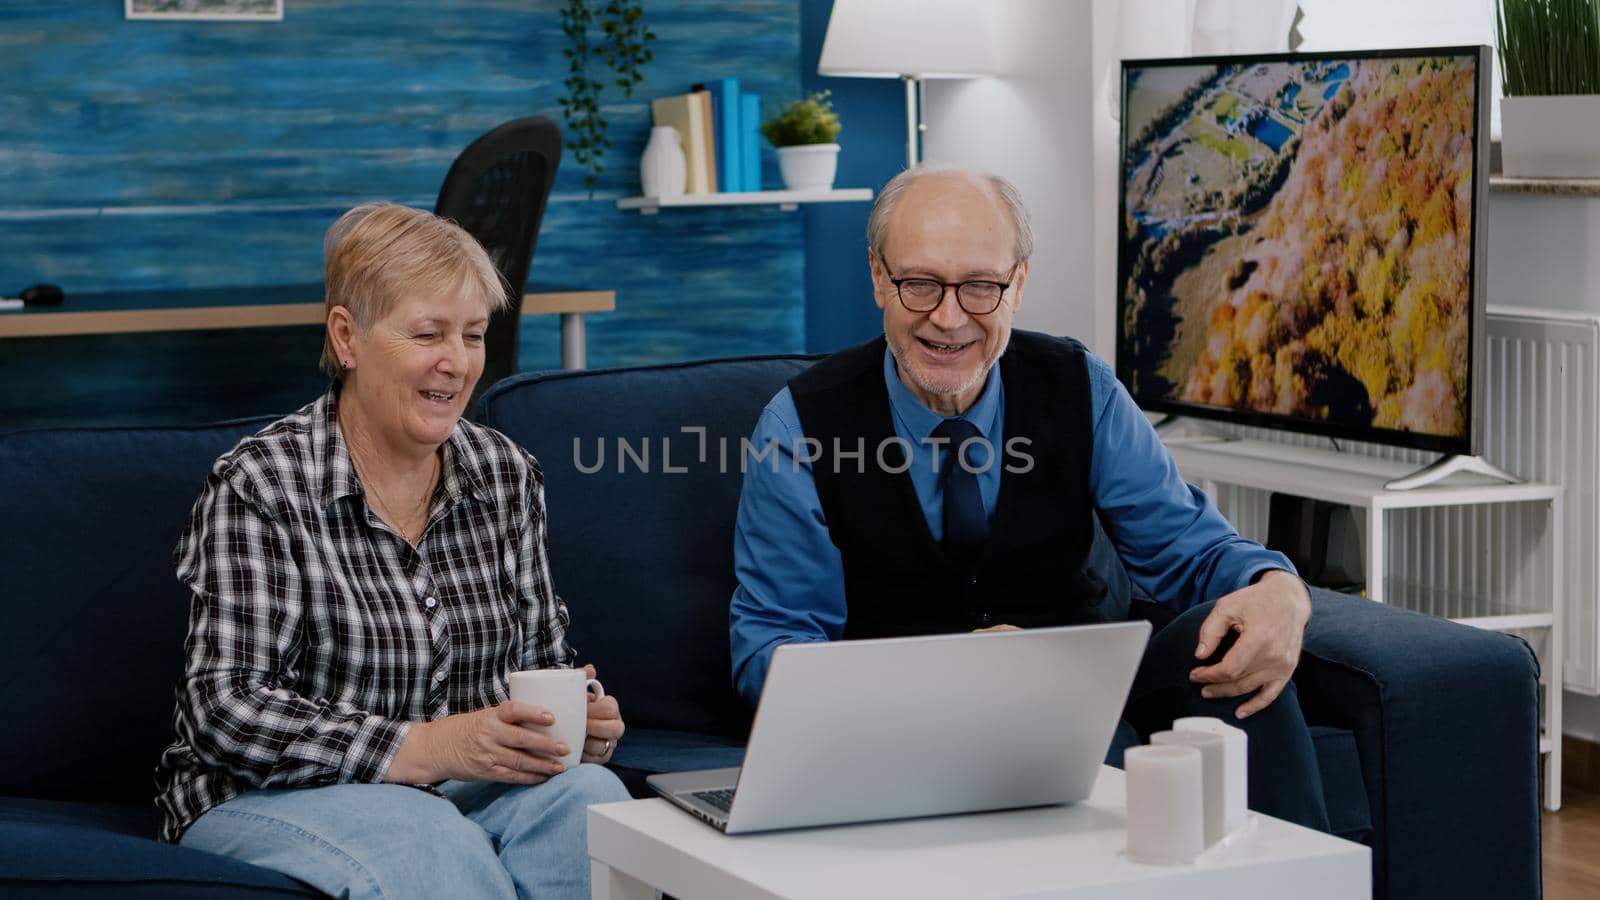 Enthusiastic couple of pensioners sitting together at home on sofa using laptop talking on video call with family friends waving at camera during online meeting. Connection lifestyle concept in quarantine